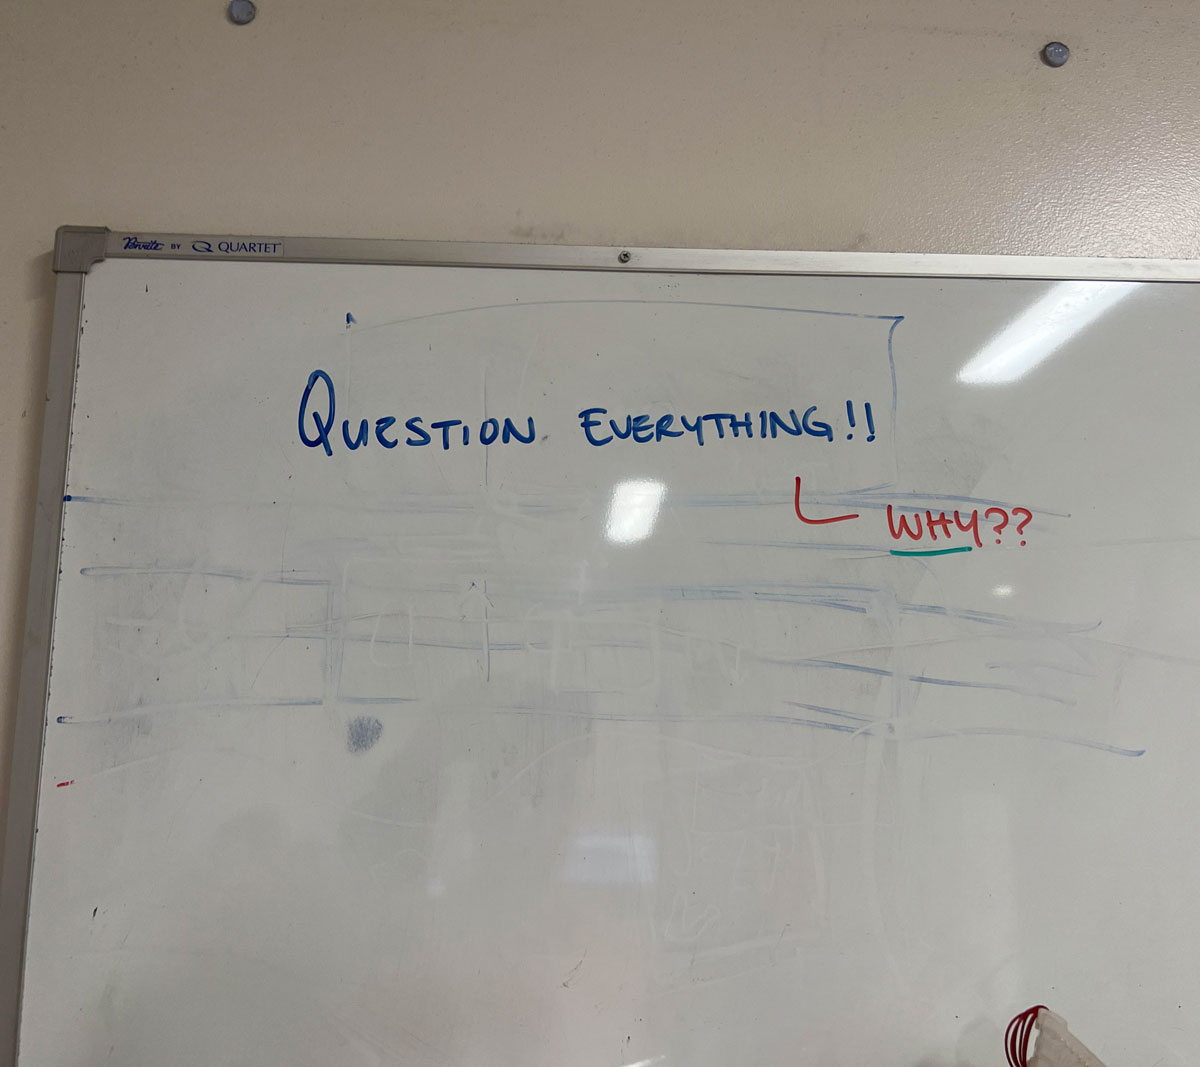 On the maintenance planner’s whiteboard at work